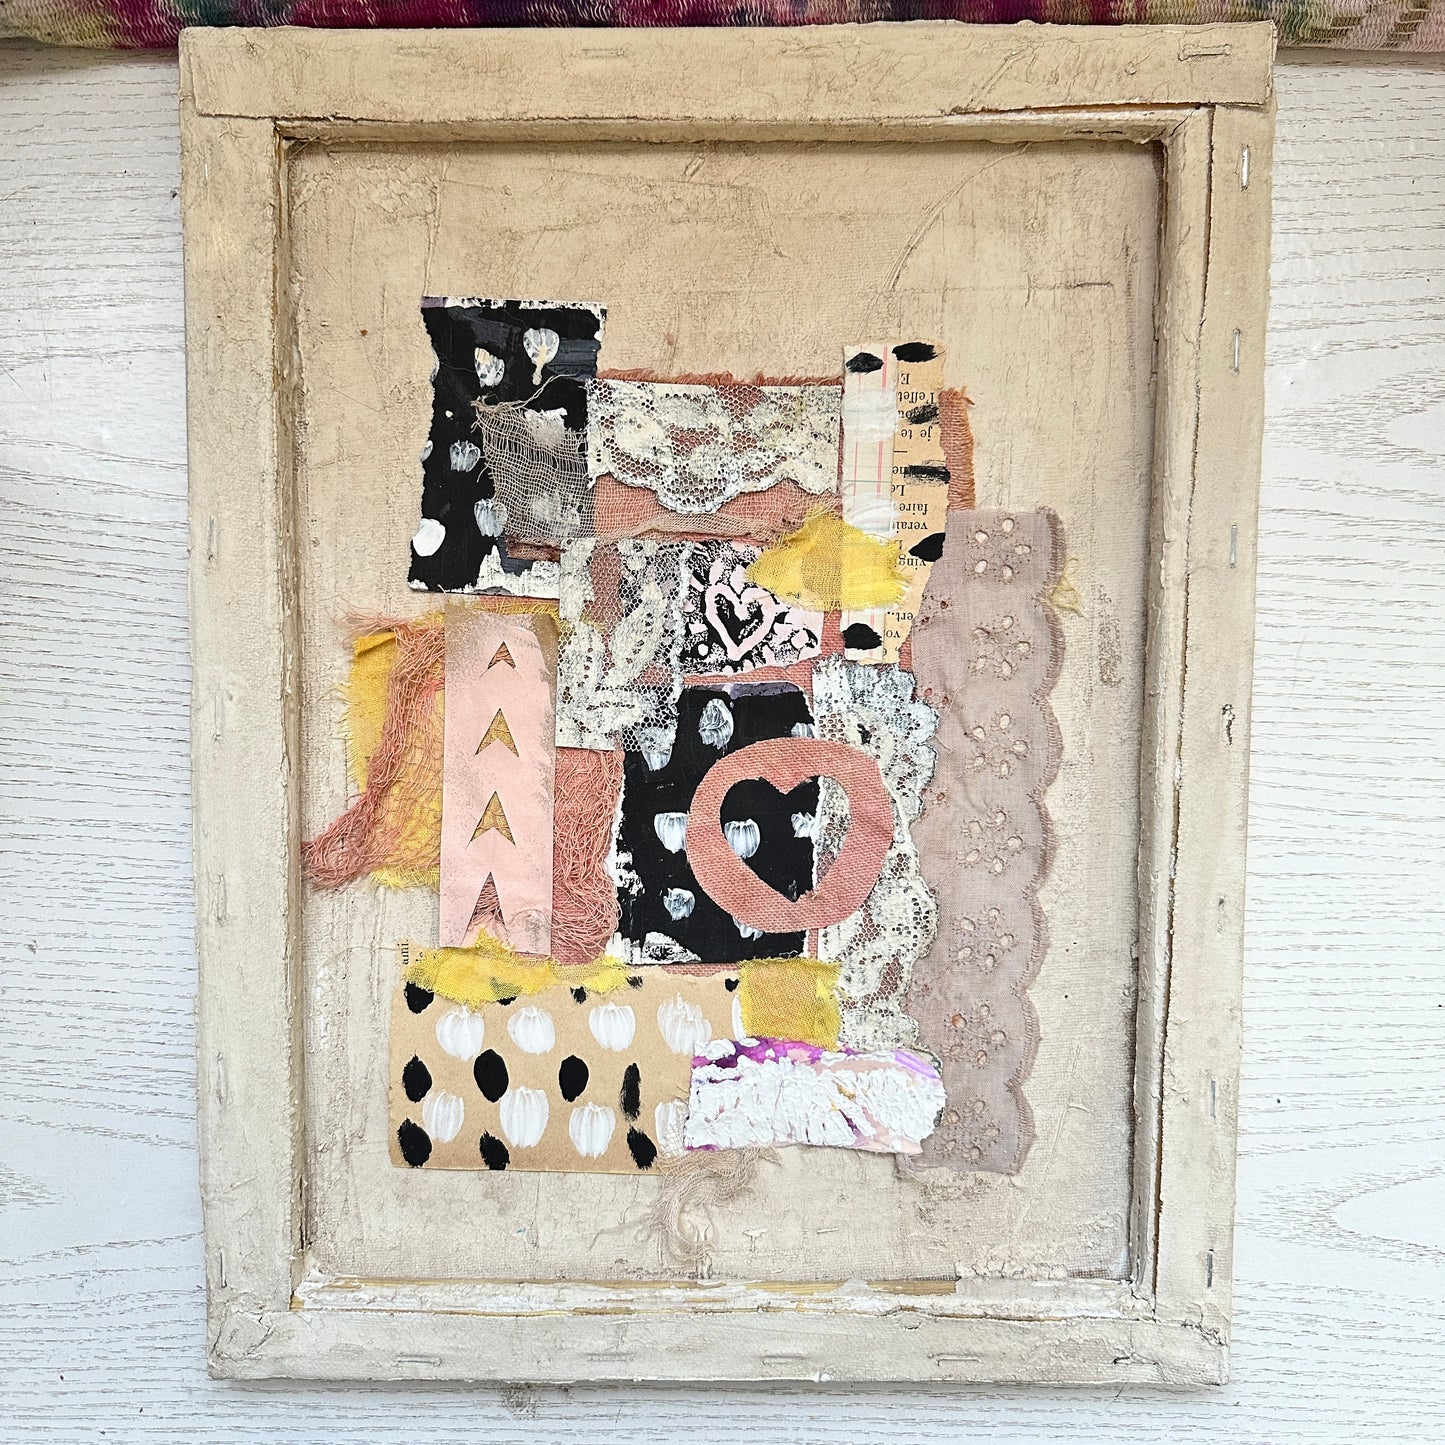 11x14 Mixed Media  Paper & Textile Collage - HOPE